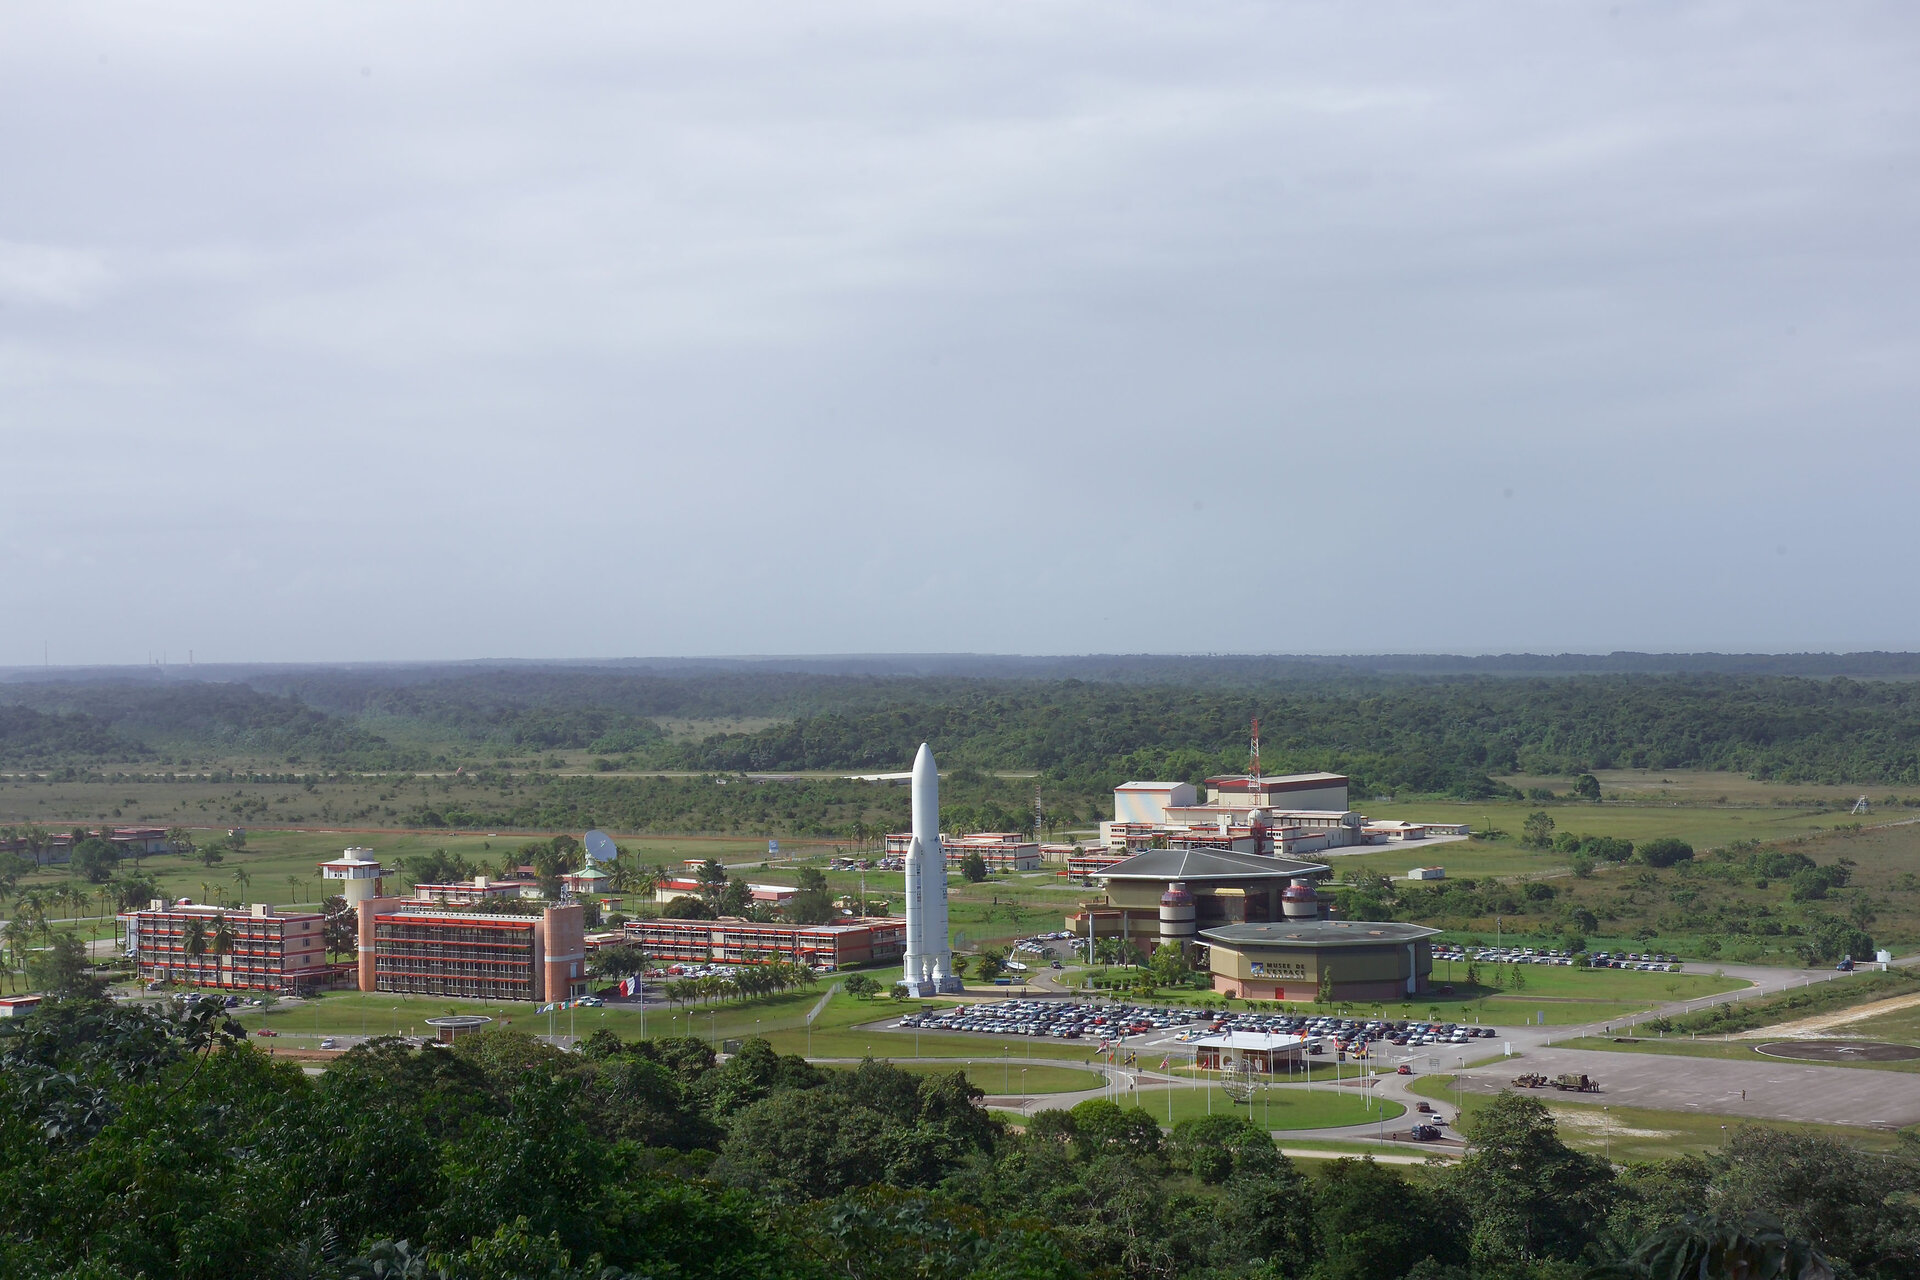 Europe's Spaceport, the Guiana Space Centre, Kourou